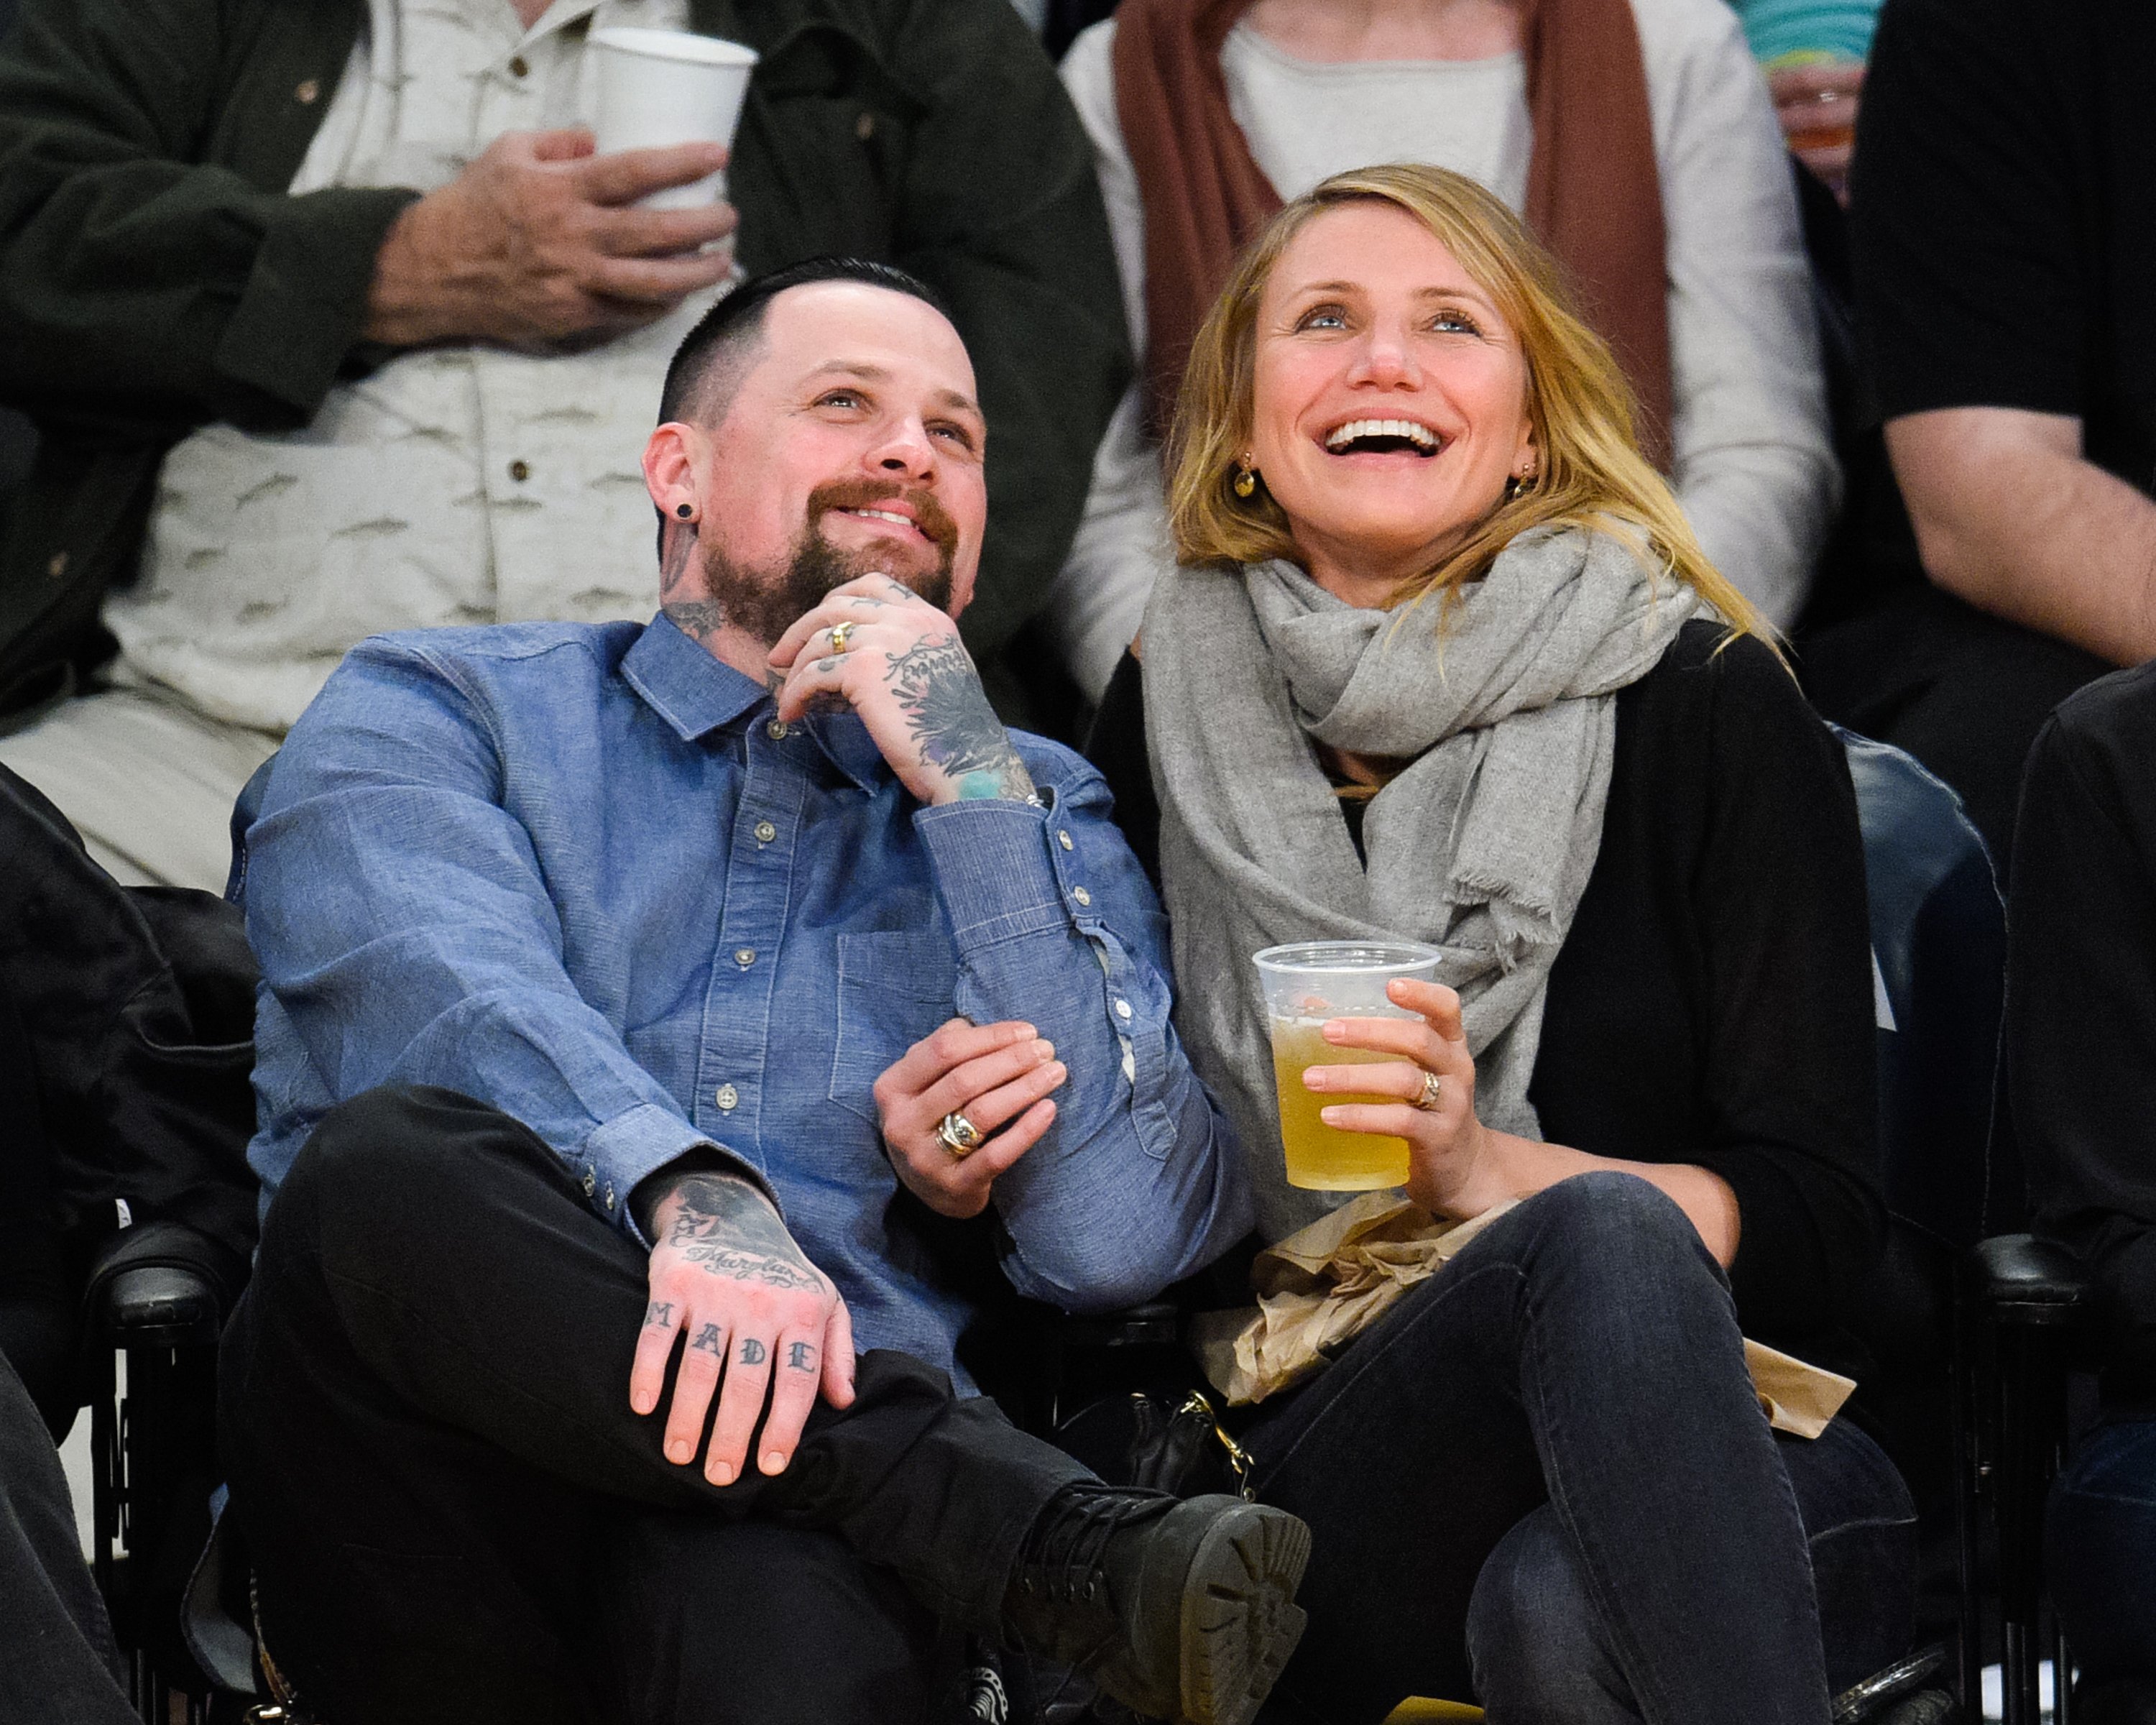 Benji Madden (L) and Cameron Diaz attend a basketball game between the Washington Wizards and the Los Angeles Lakers at Staples Center on January 27, 2015 | Source: Getty Images